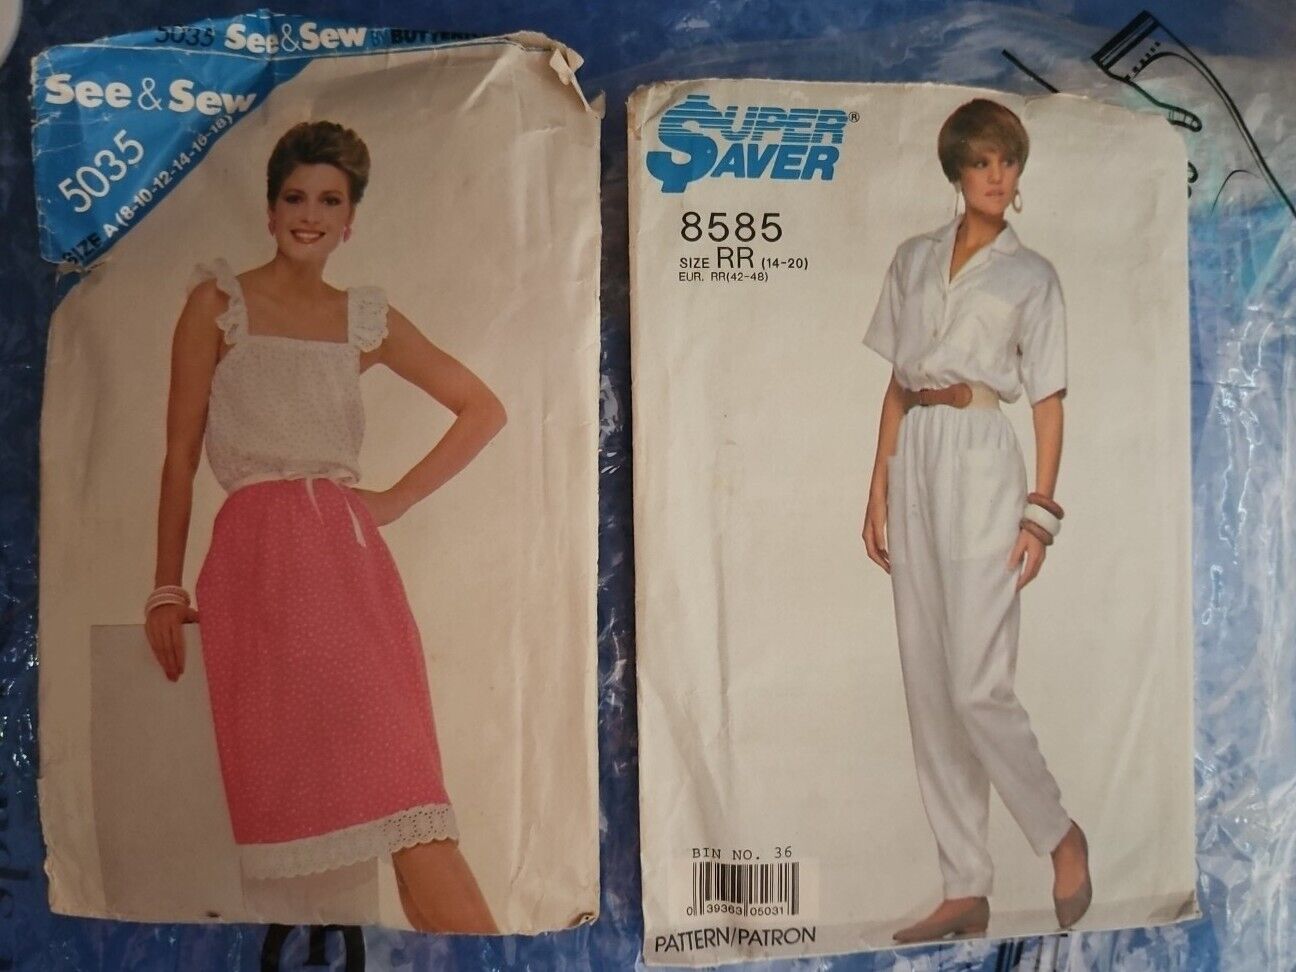 Vintage Lot Of 2. Sewing Patterns. 8585. 5035. Super Saver & See & Sew.